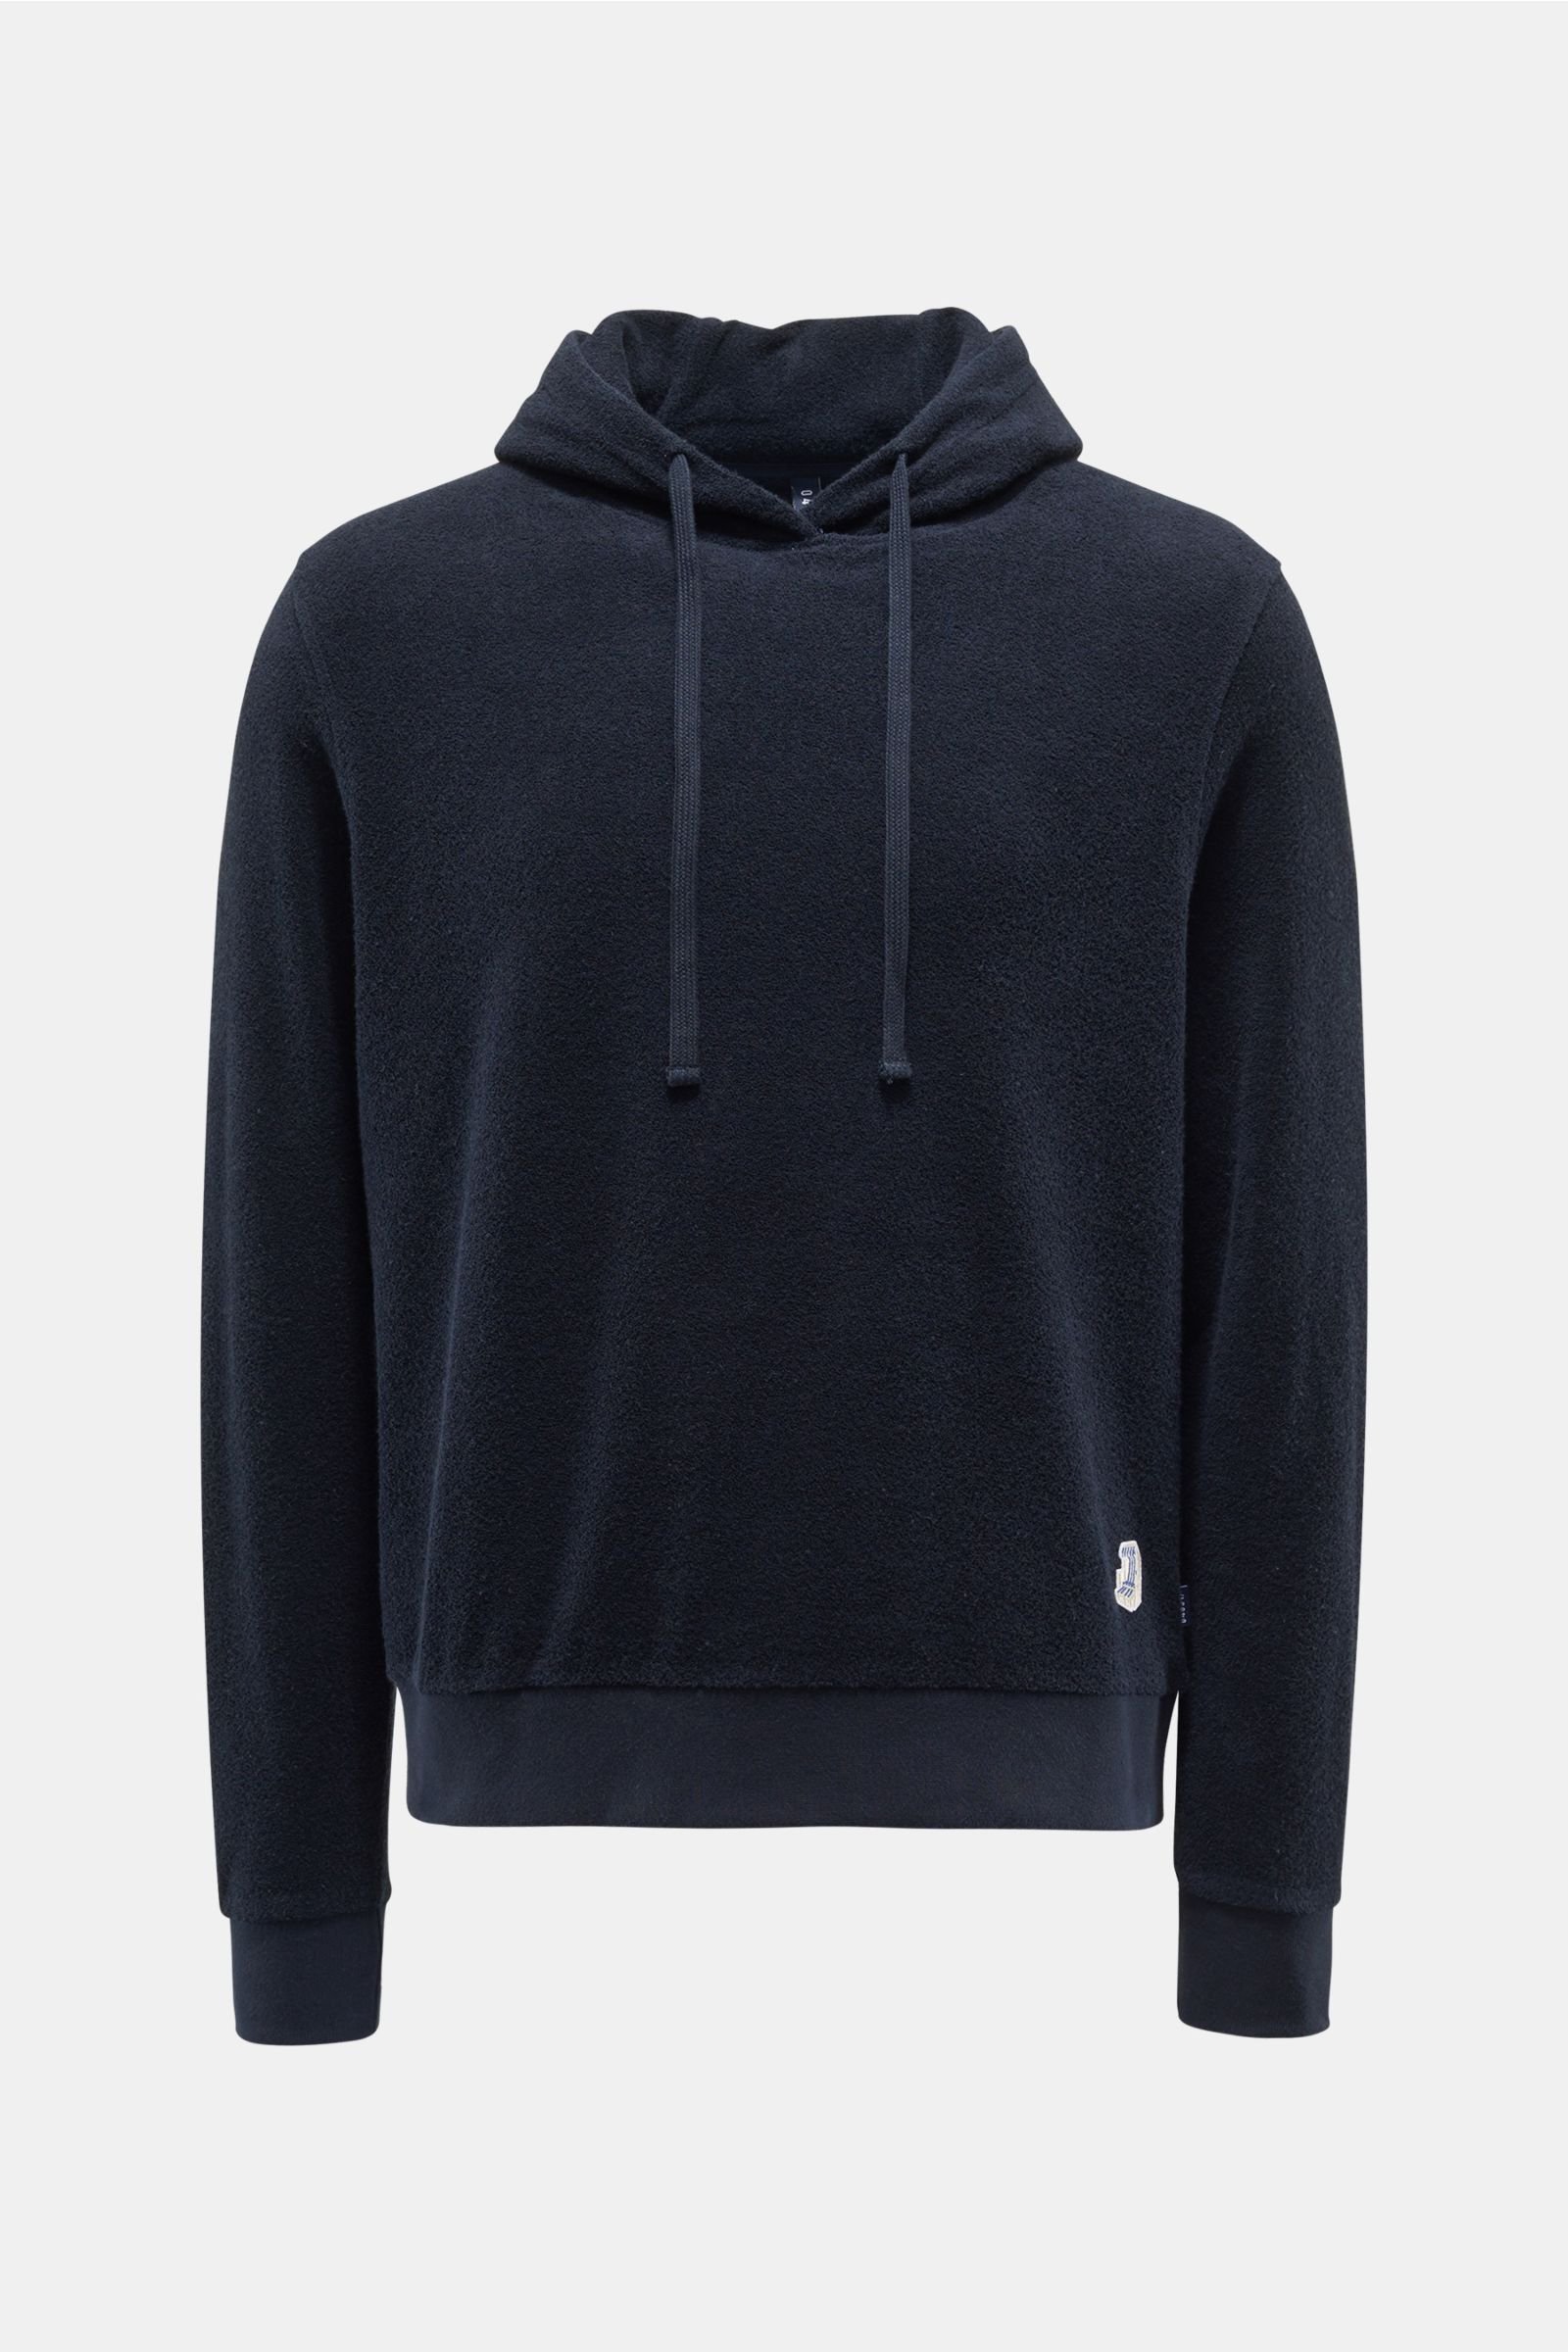 Terry hooded jumper navy